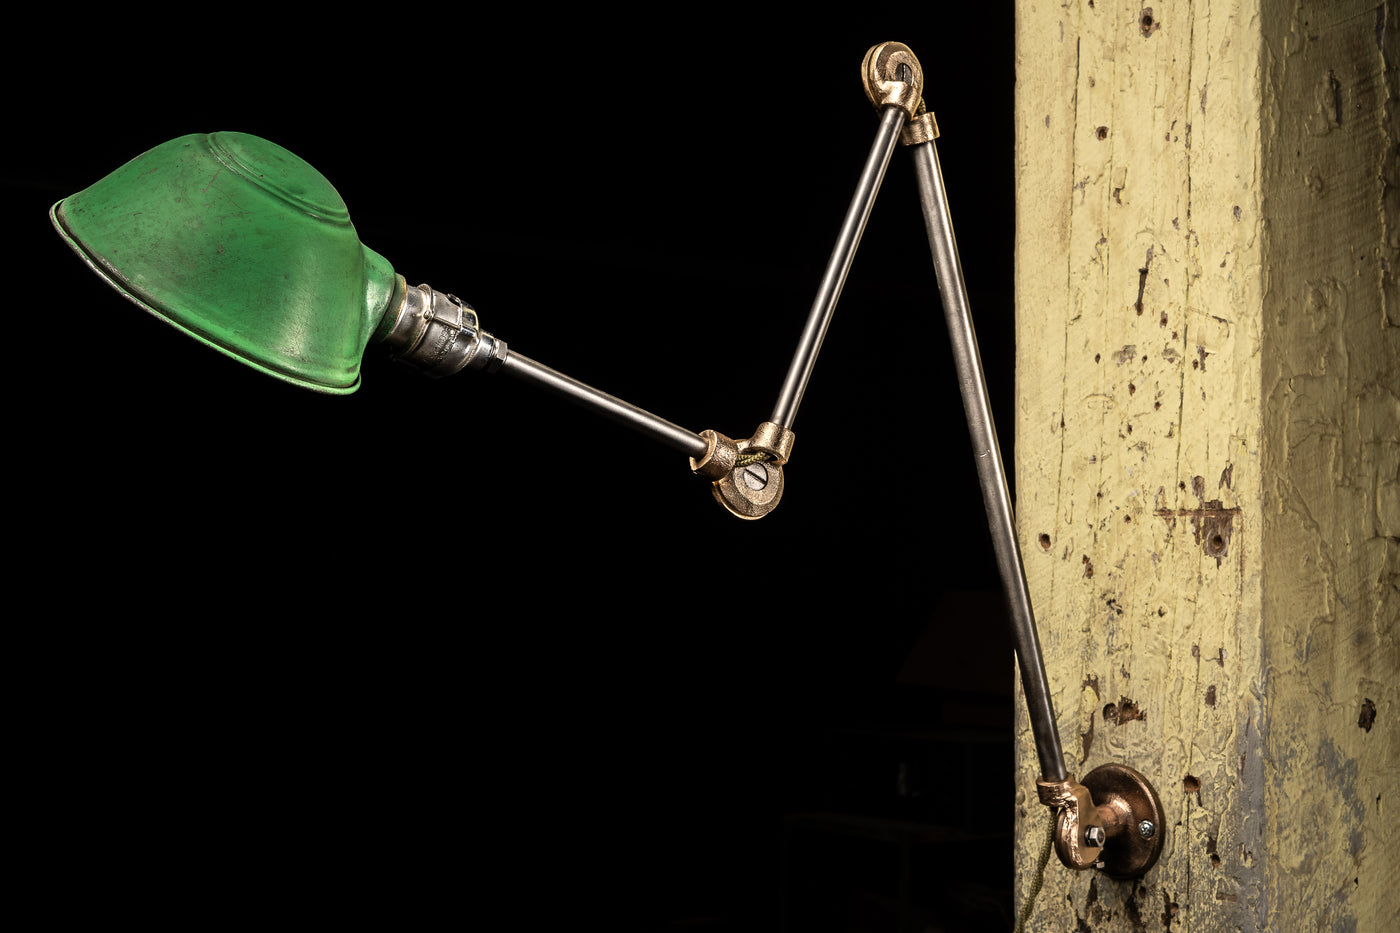 Antique Articulating Task Lamp with Green Shade